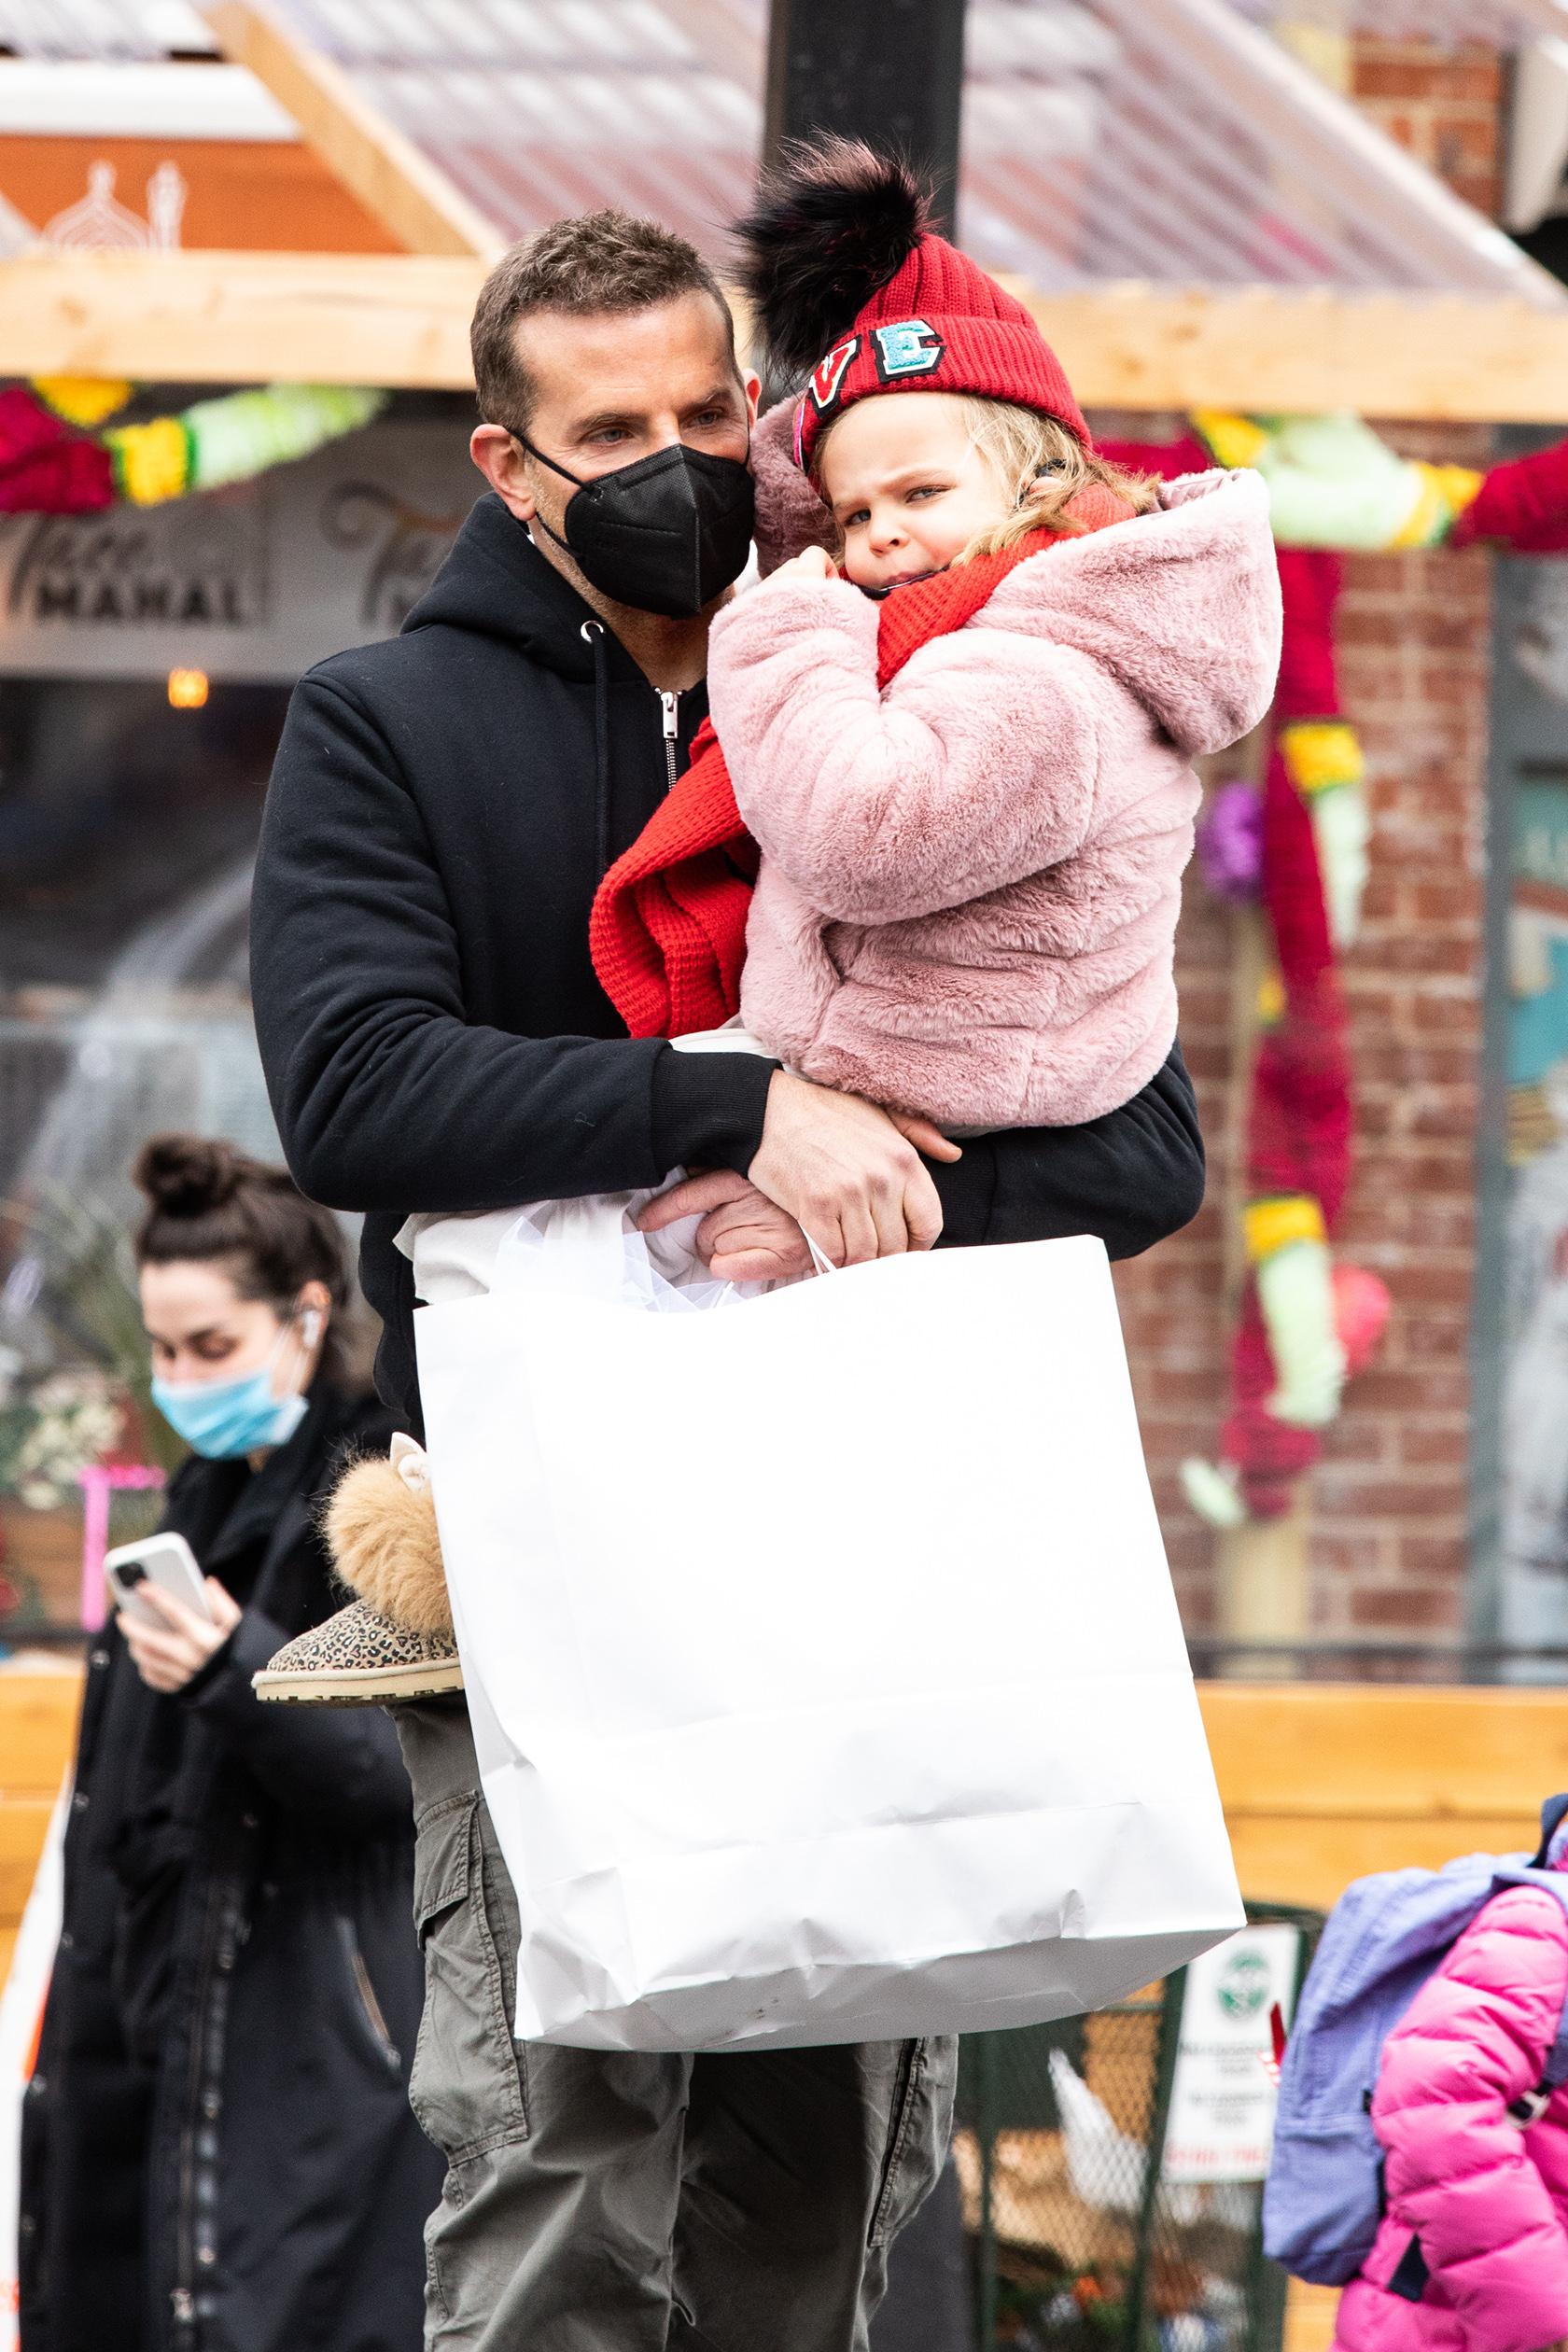 Bradley Cooper seen with his daughter, Lea, on March 17, 2021, in New York City, New York | Source: Getty Images